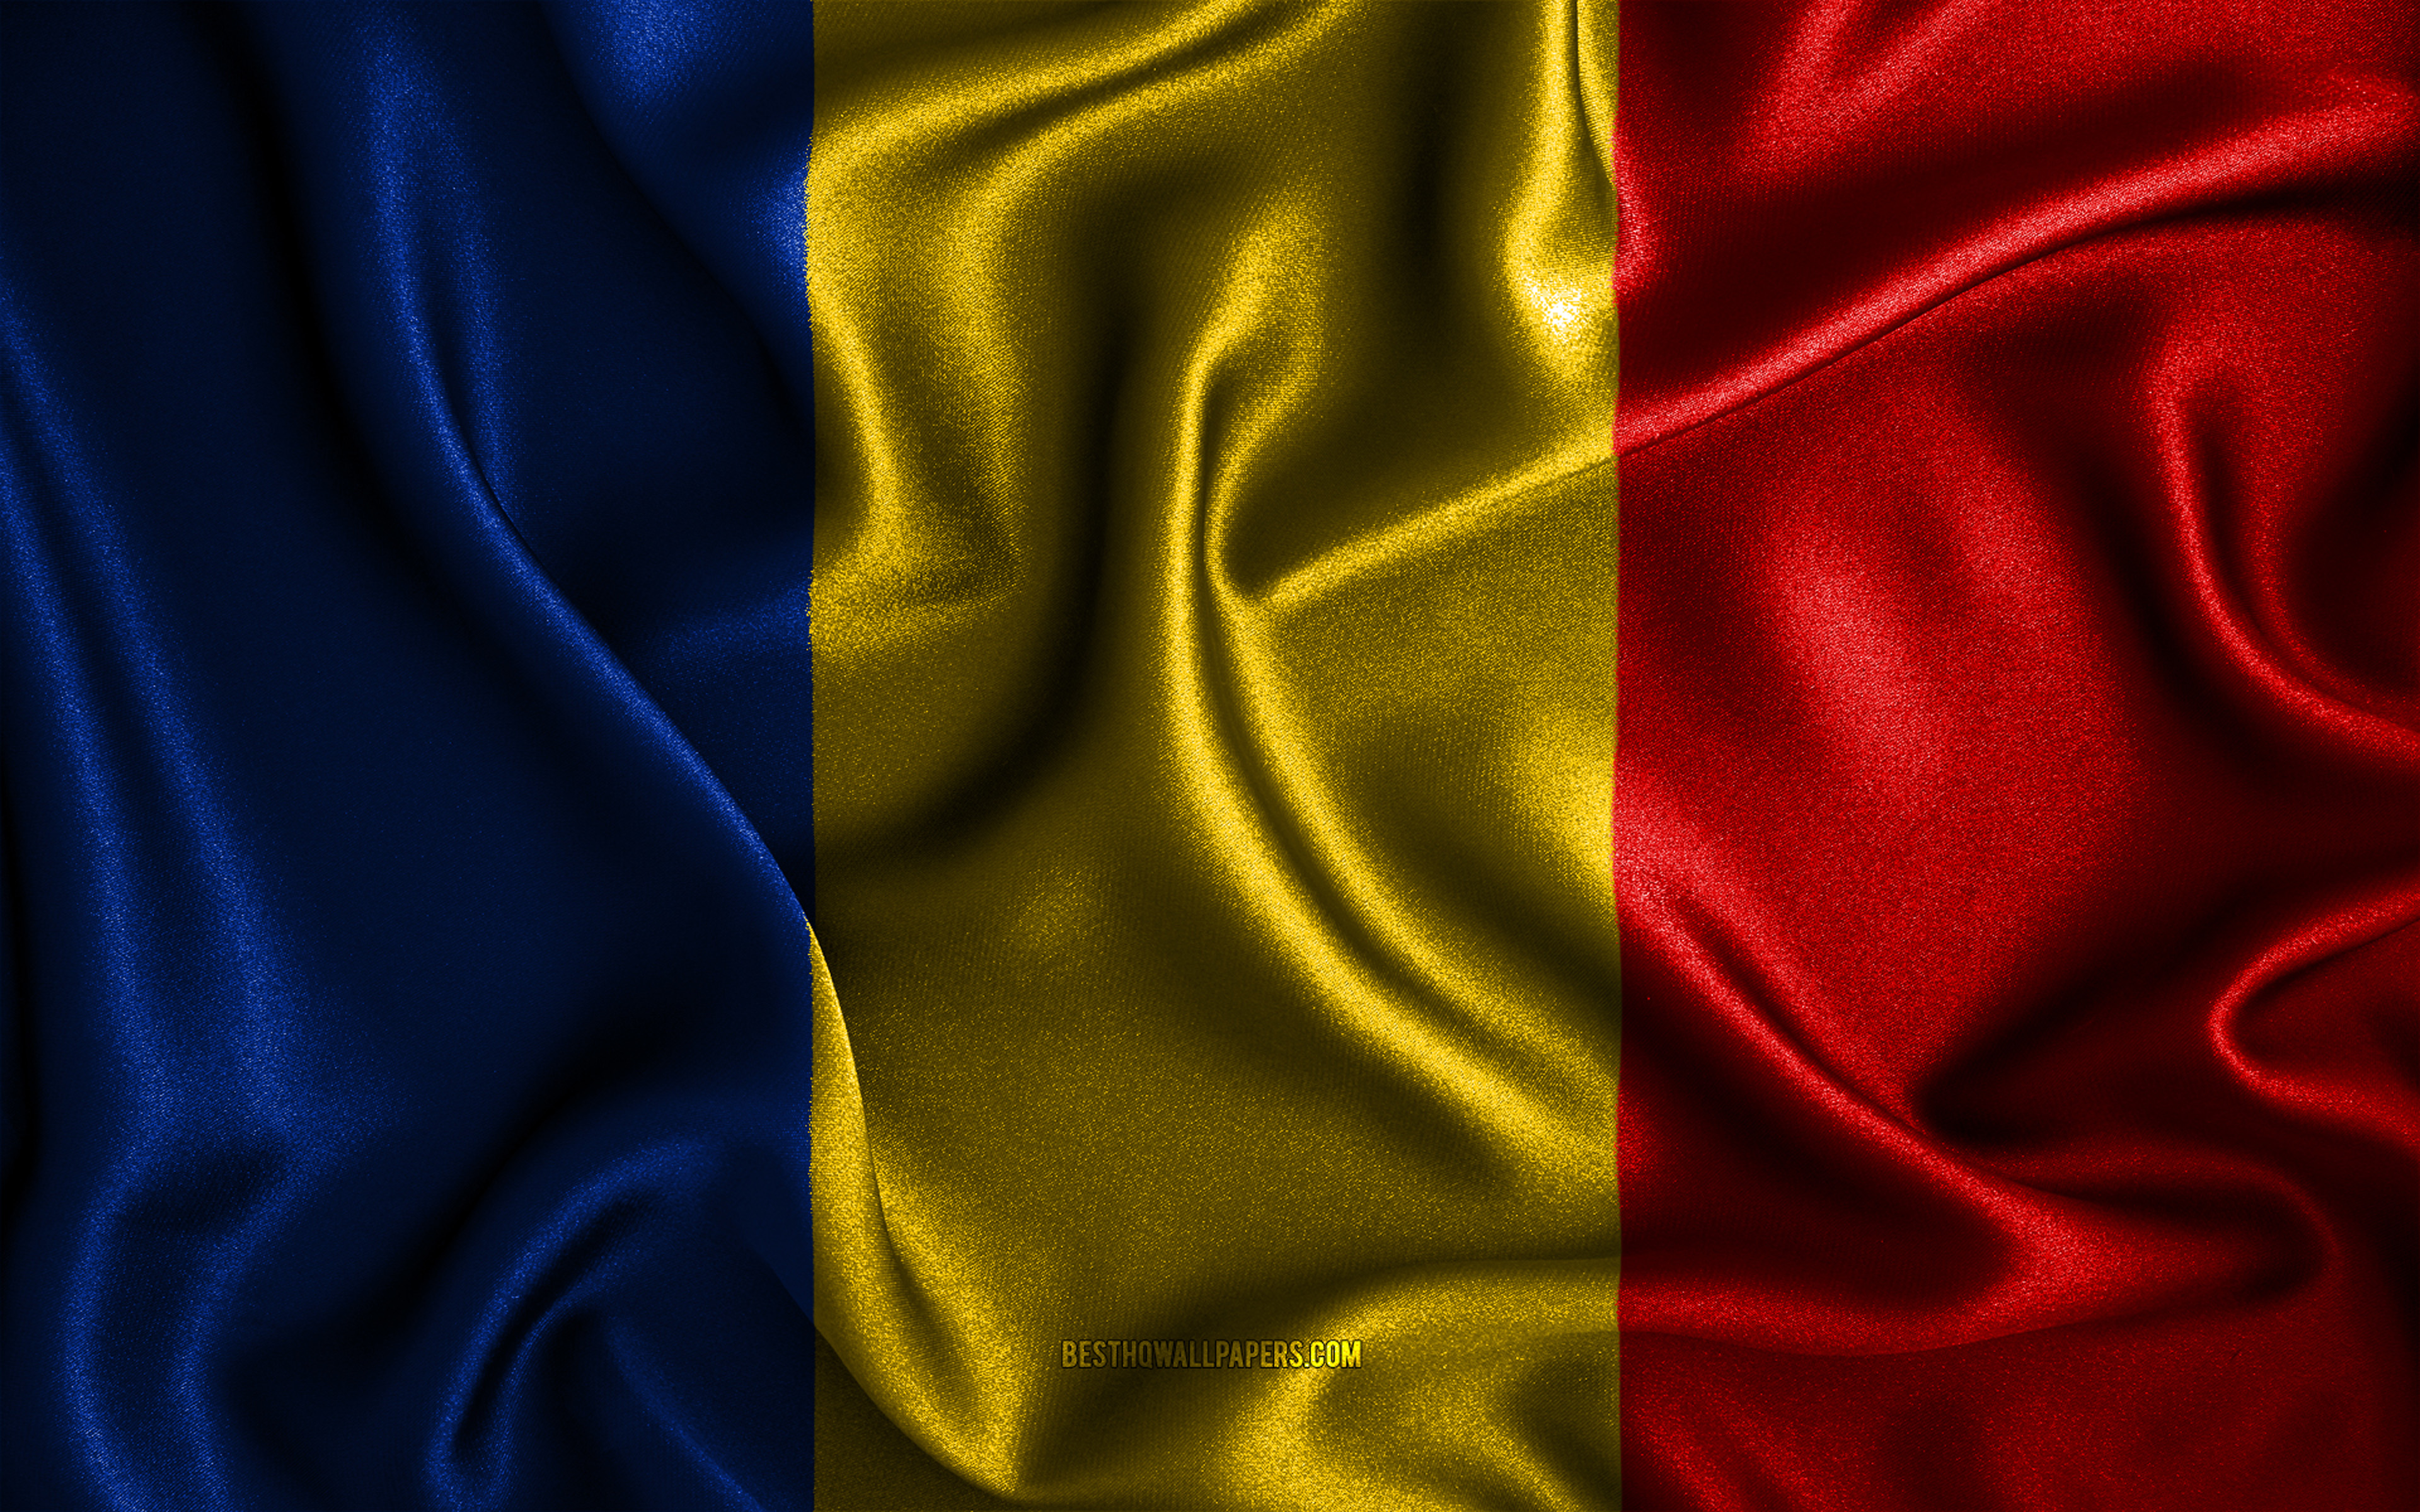 Download wallpapers romanian flag k silk wavy flags european countries national symbols flag of romania fabric flags romania flag d art romania europe romania d flag for desktop with resolution x high